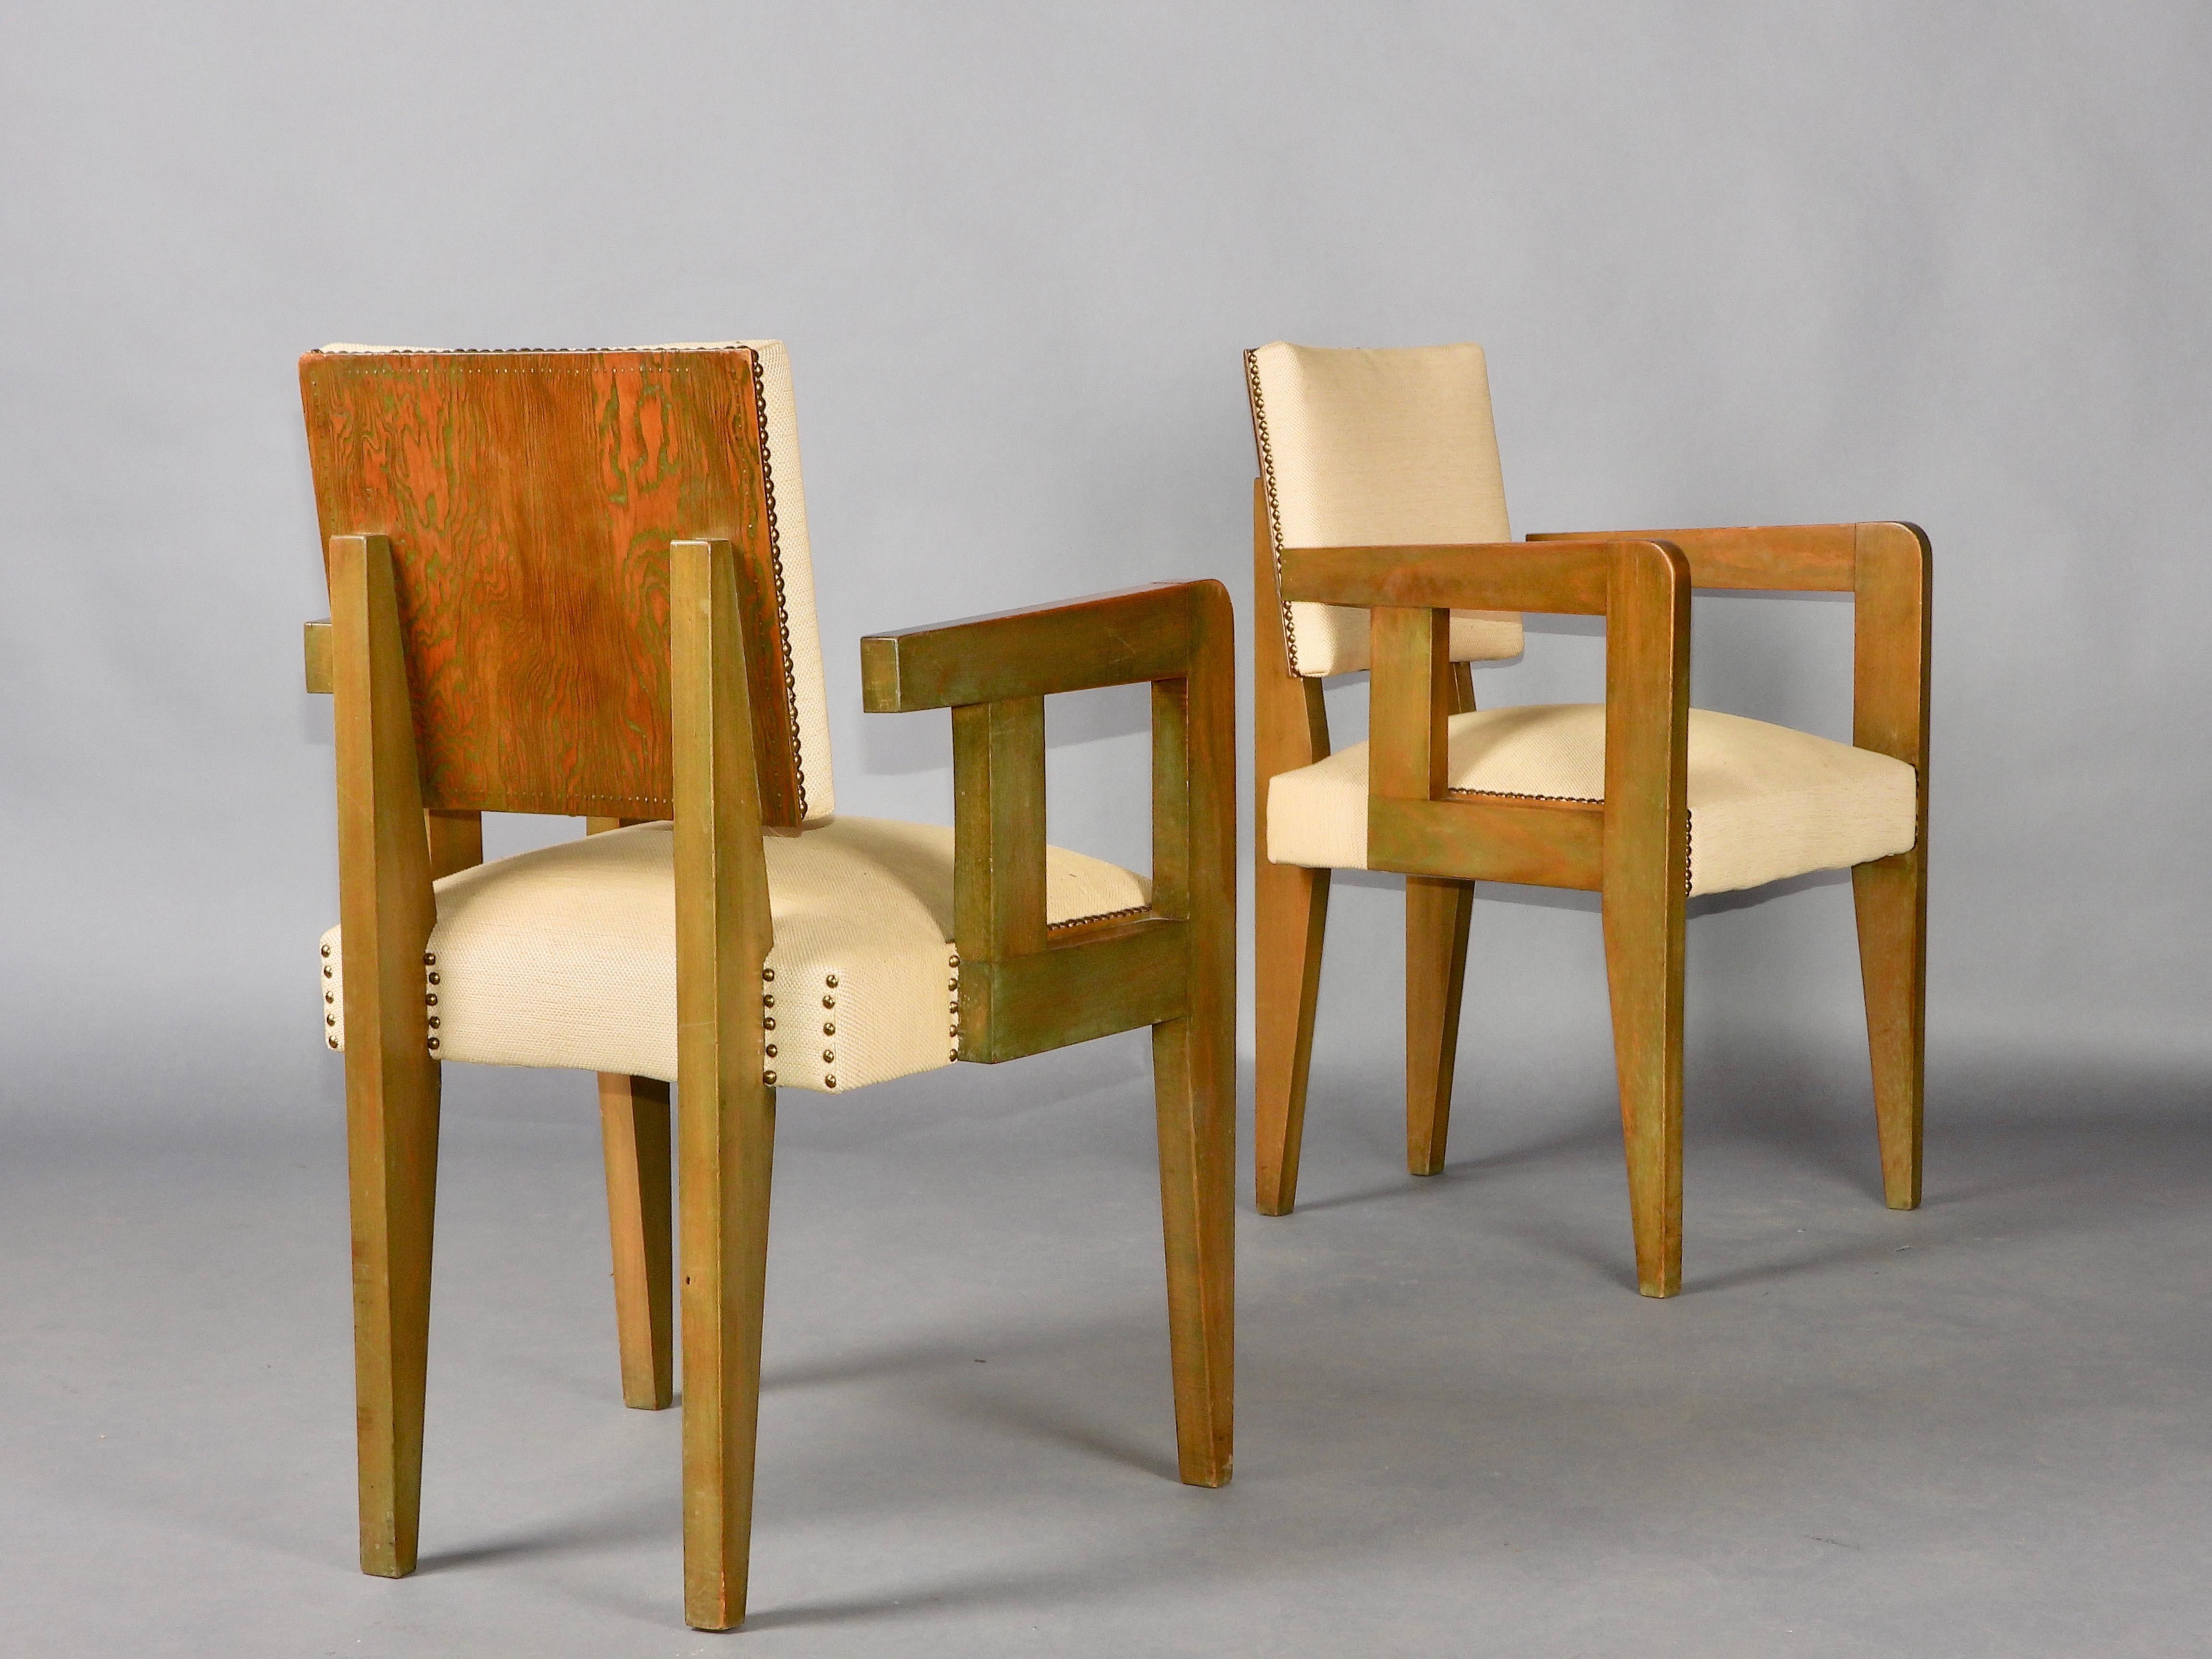 Pair of bridge chairs stained Oregon pine on the back side , lacquer olive green color wood, brass nail-heads and fabric upholstery, each underside stamped 'BREVETE SORNAY/FRANCE ETRANGER